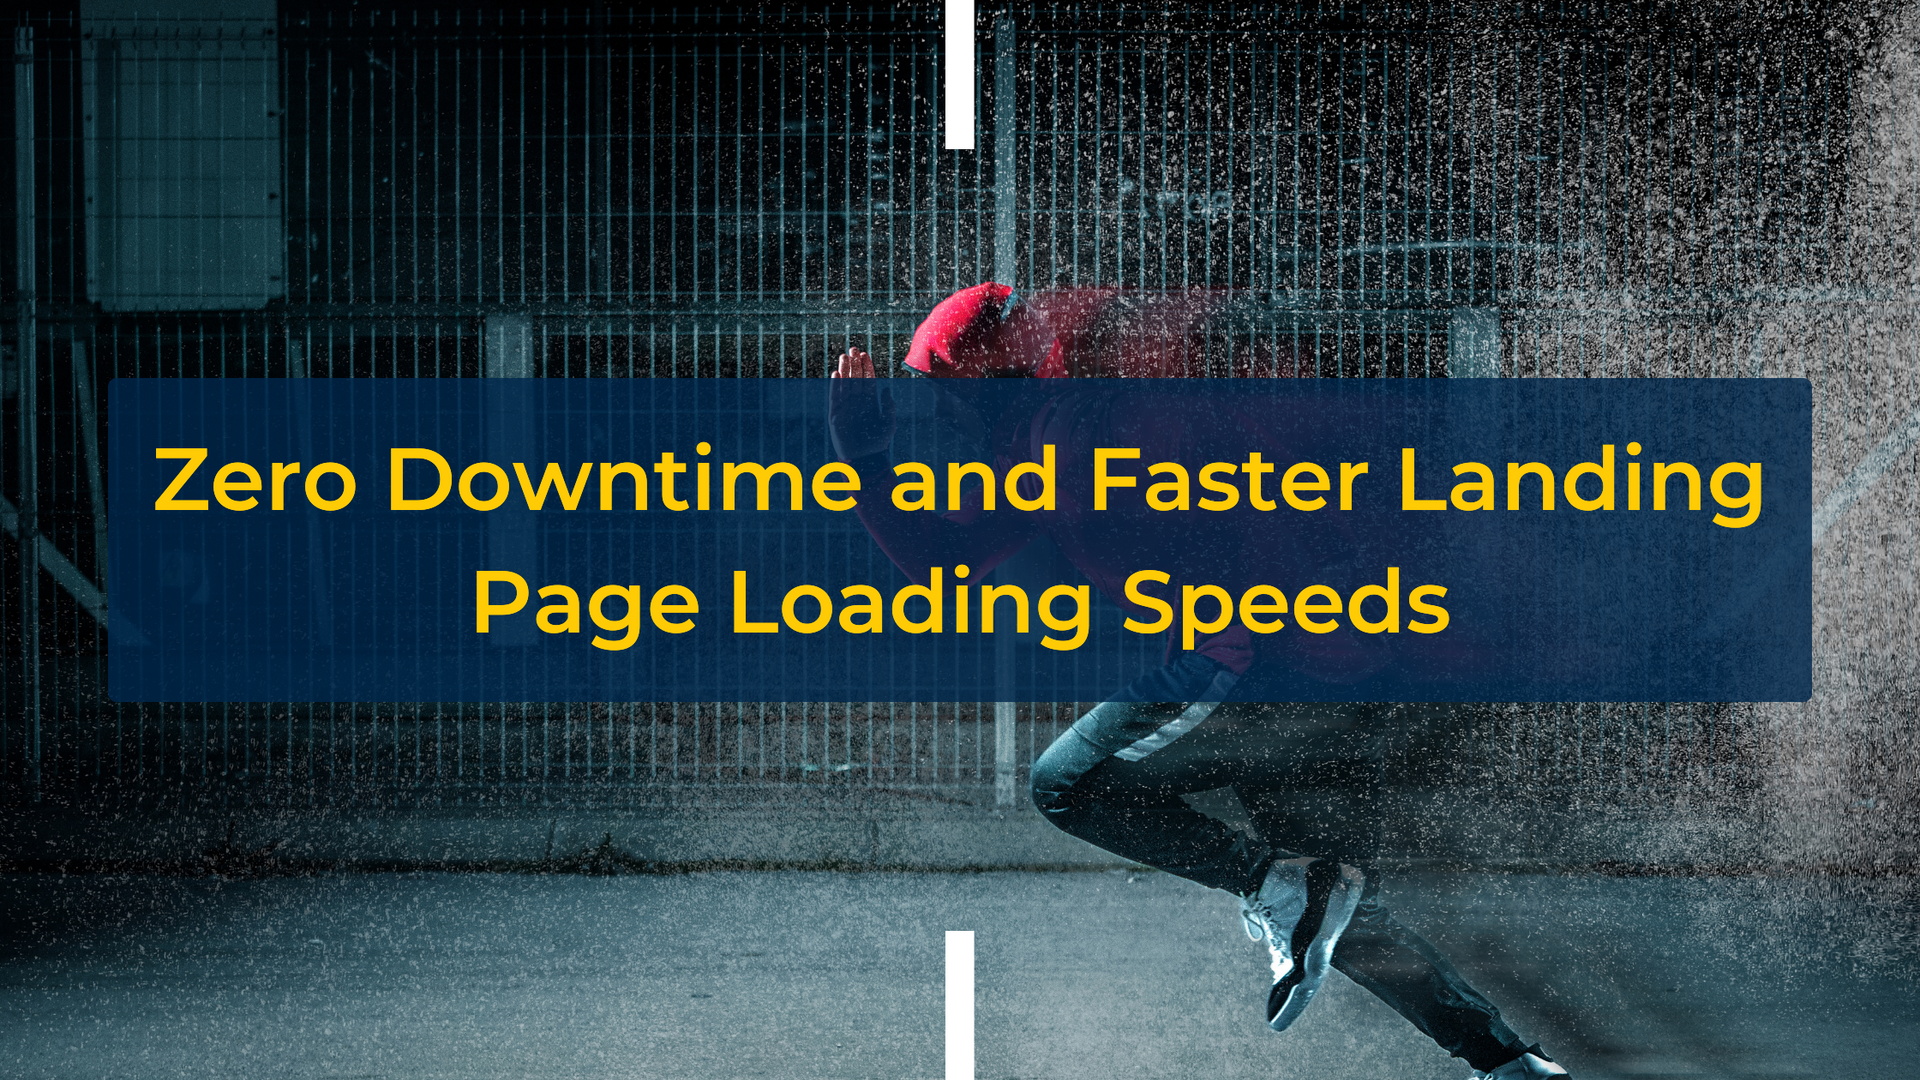 Zero Downtime and Faster Landing Page Loading Speeds